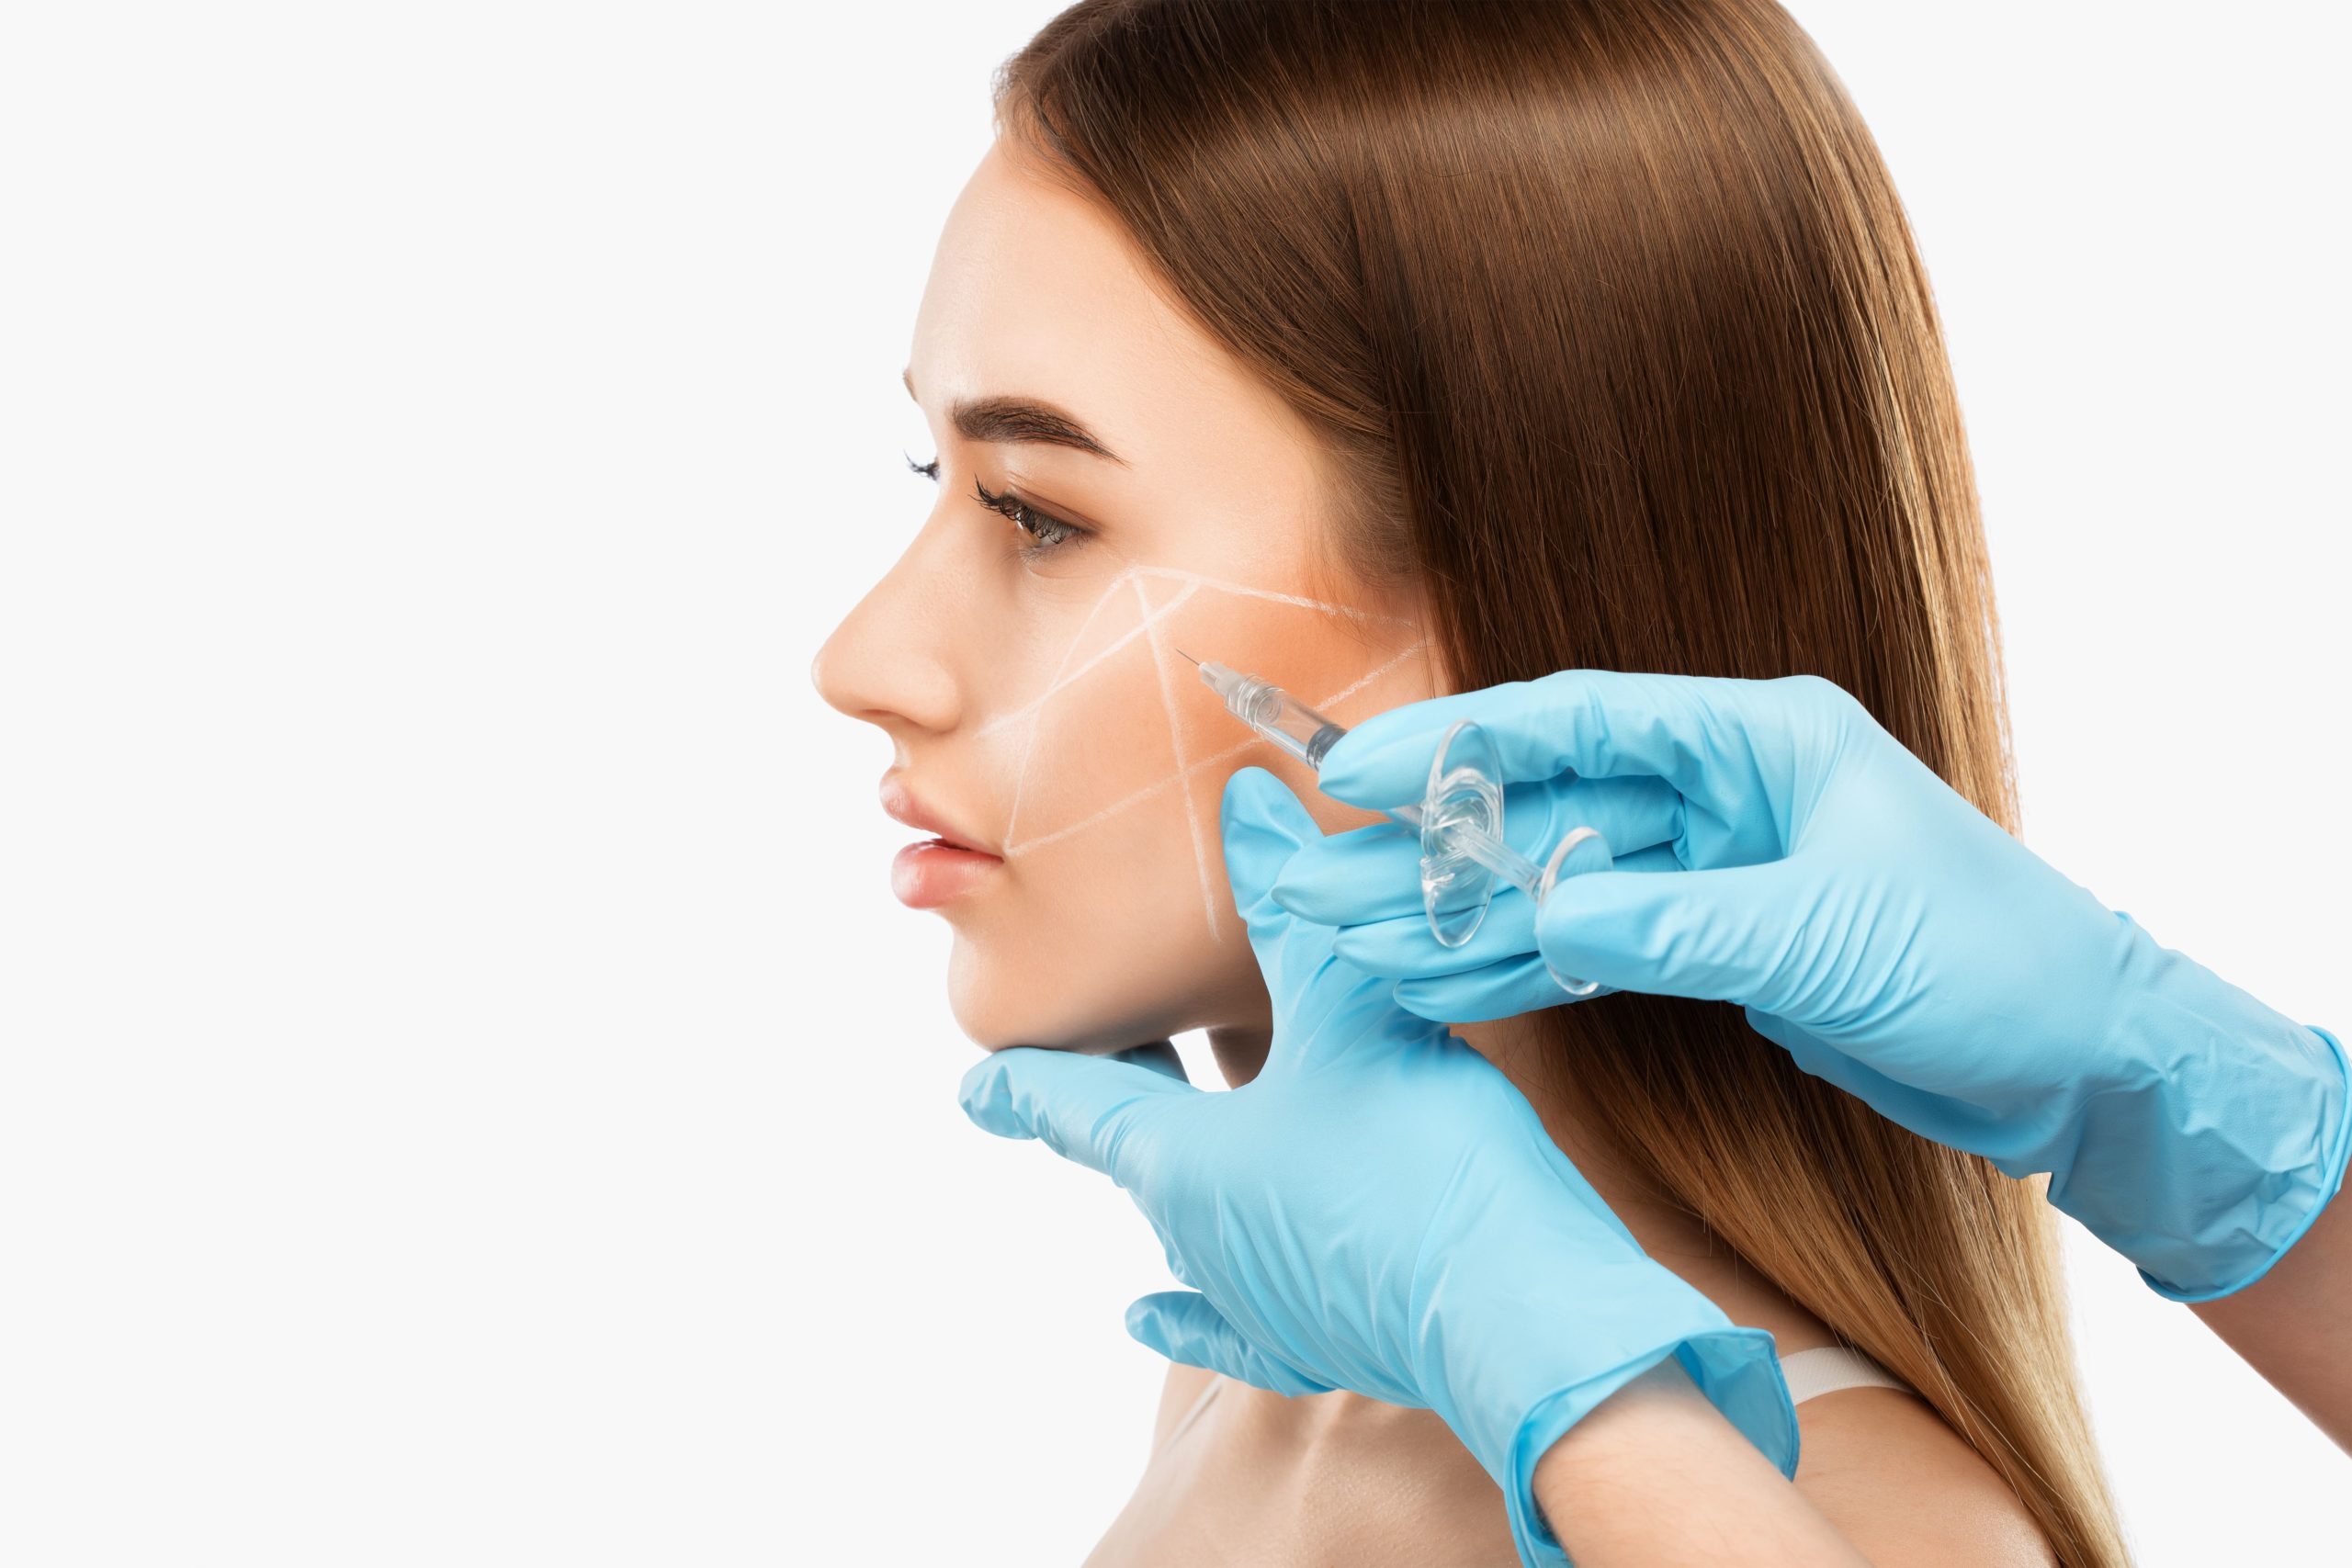 How to Make the Most of Your Botox/Dysport Treatment